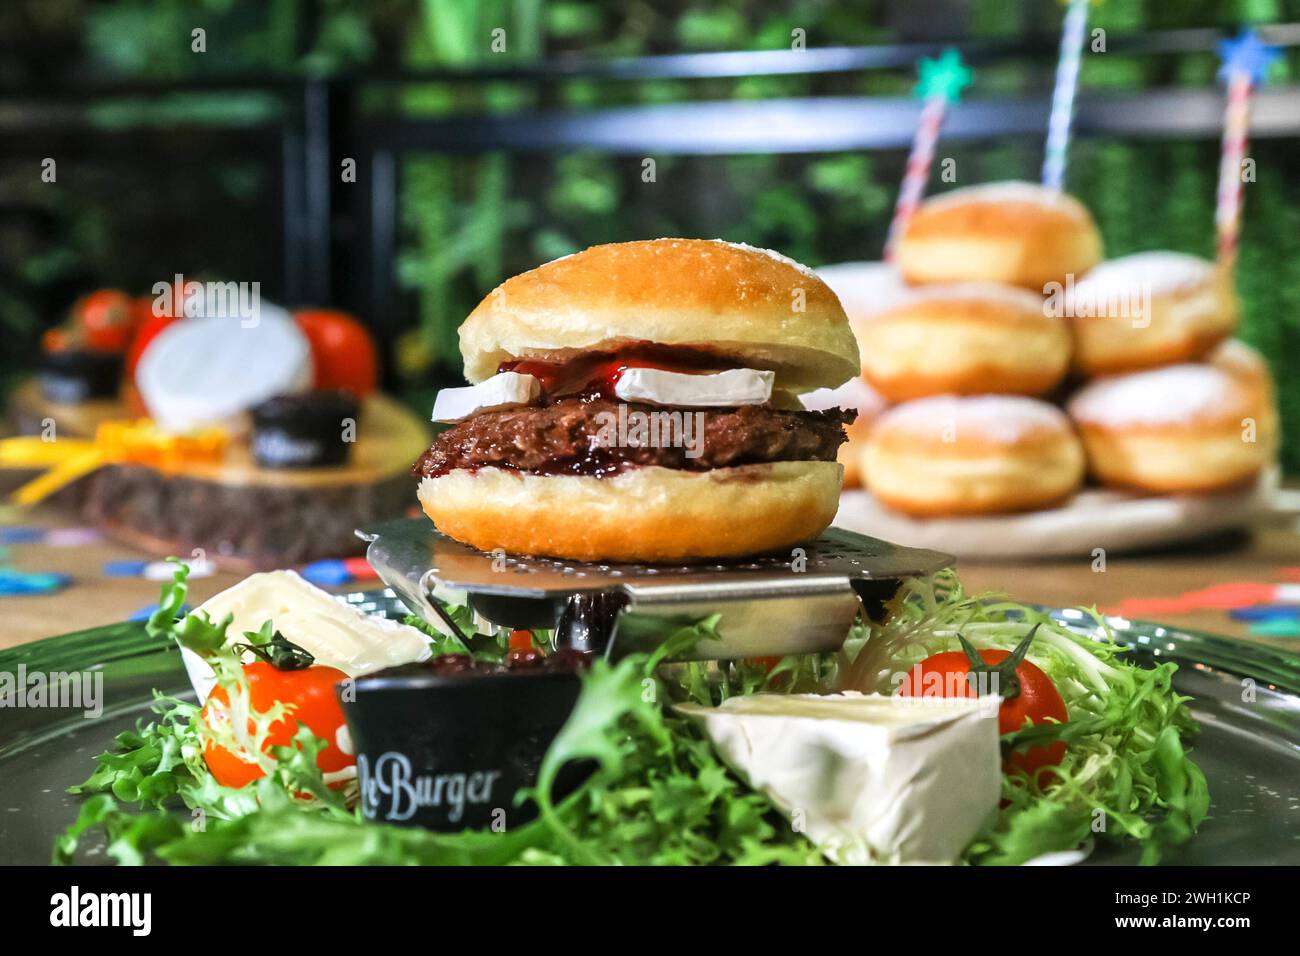 RECORD DATE NOT STATED 06.02.2024, Le Burger Flagshiprestaurant, LE BURGERs Neuer Krapfen-Burger, Faschingszeit ist Krapfenzeit im Bild: Le Krapfen-Burger mit Rindfleisch, LE BURGERs Neuer Krapfen-Burger *** 06 02 2024, Le Burger flagship restaurant, LE BURGERs new doughnut burger, Carnival time is doughnut time in the picture Le doughnut burger with beef, LE BURGERs new doughnut burger Stock Photo